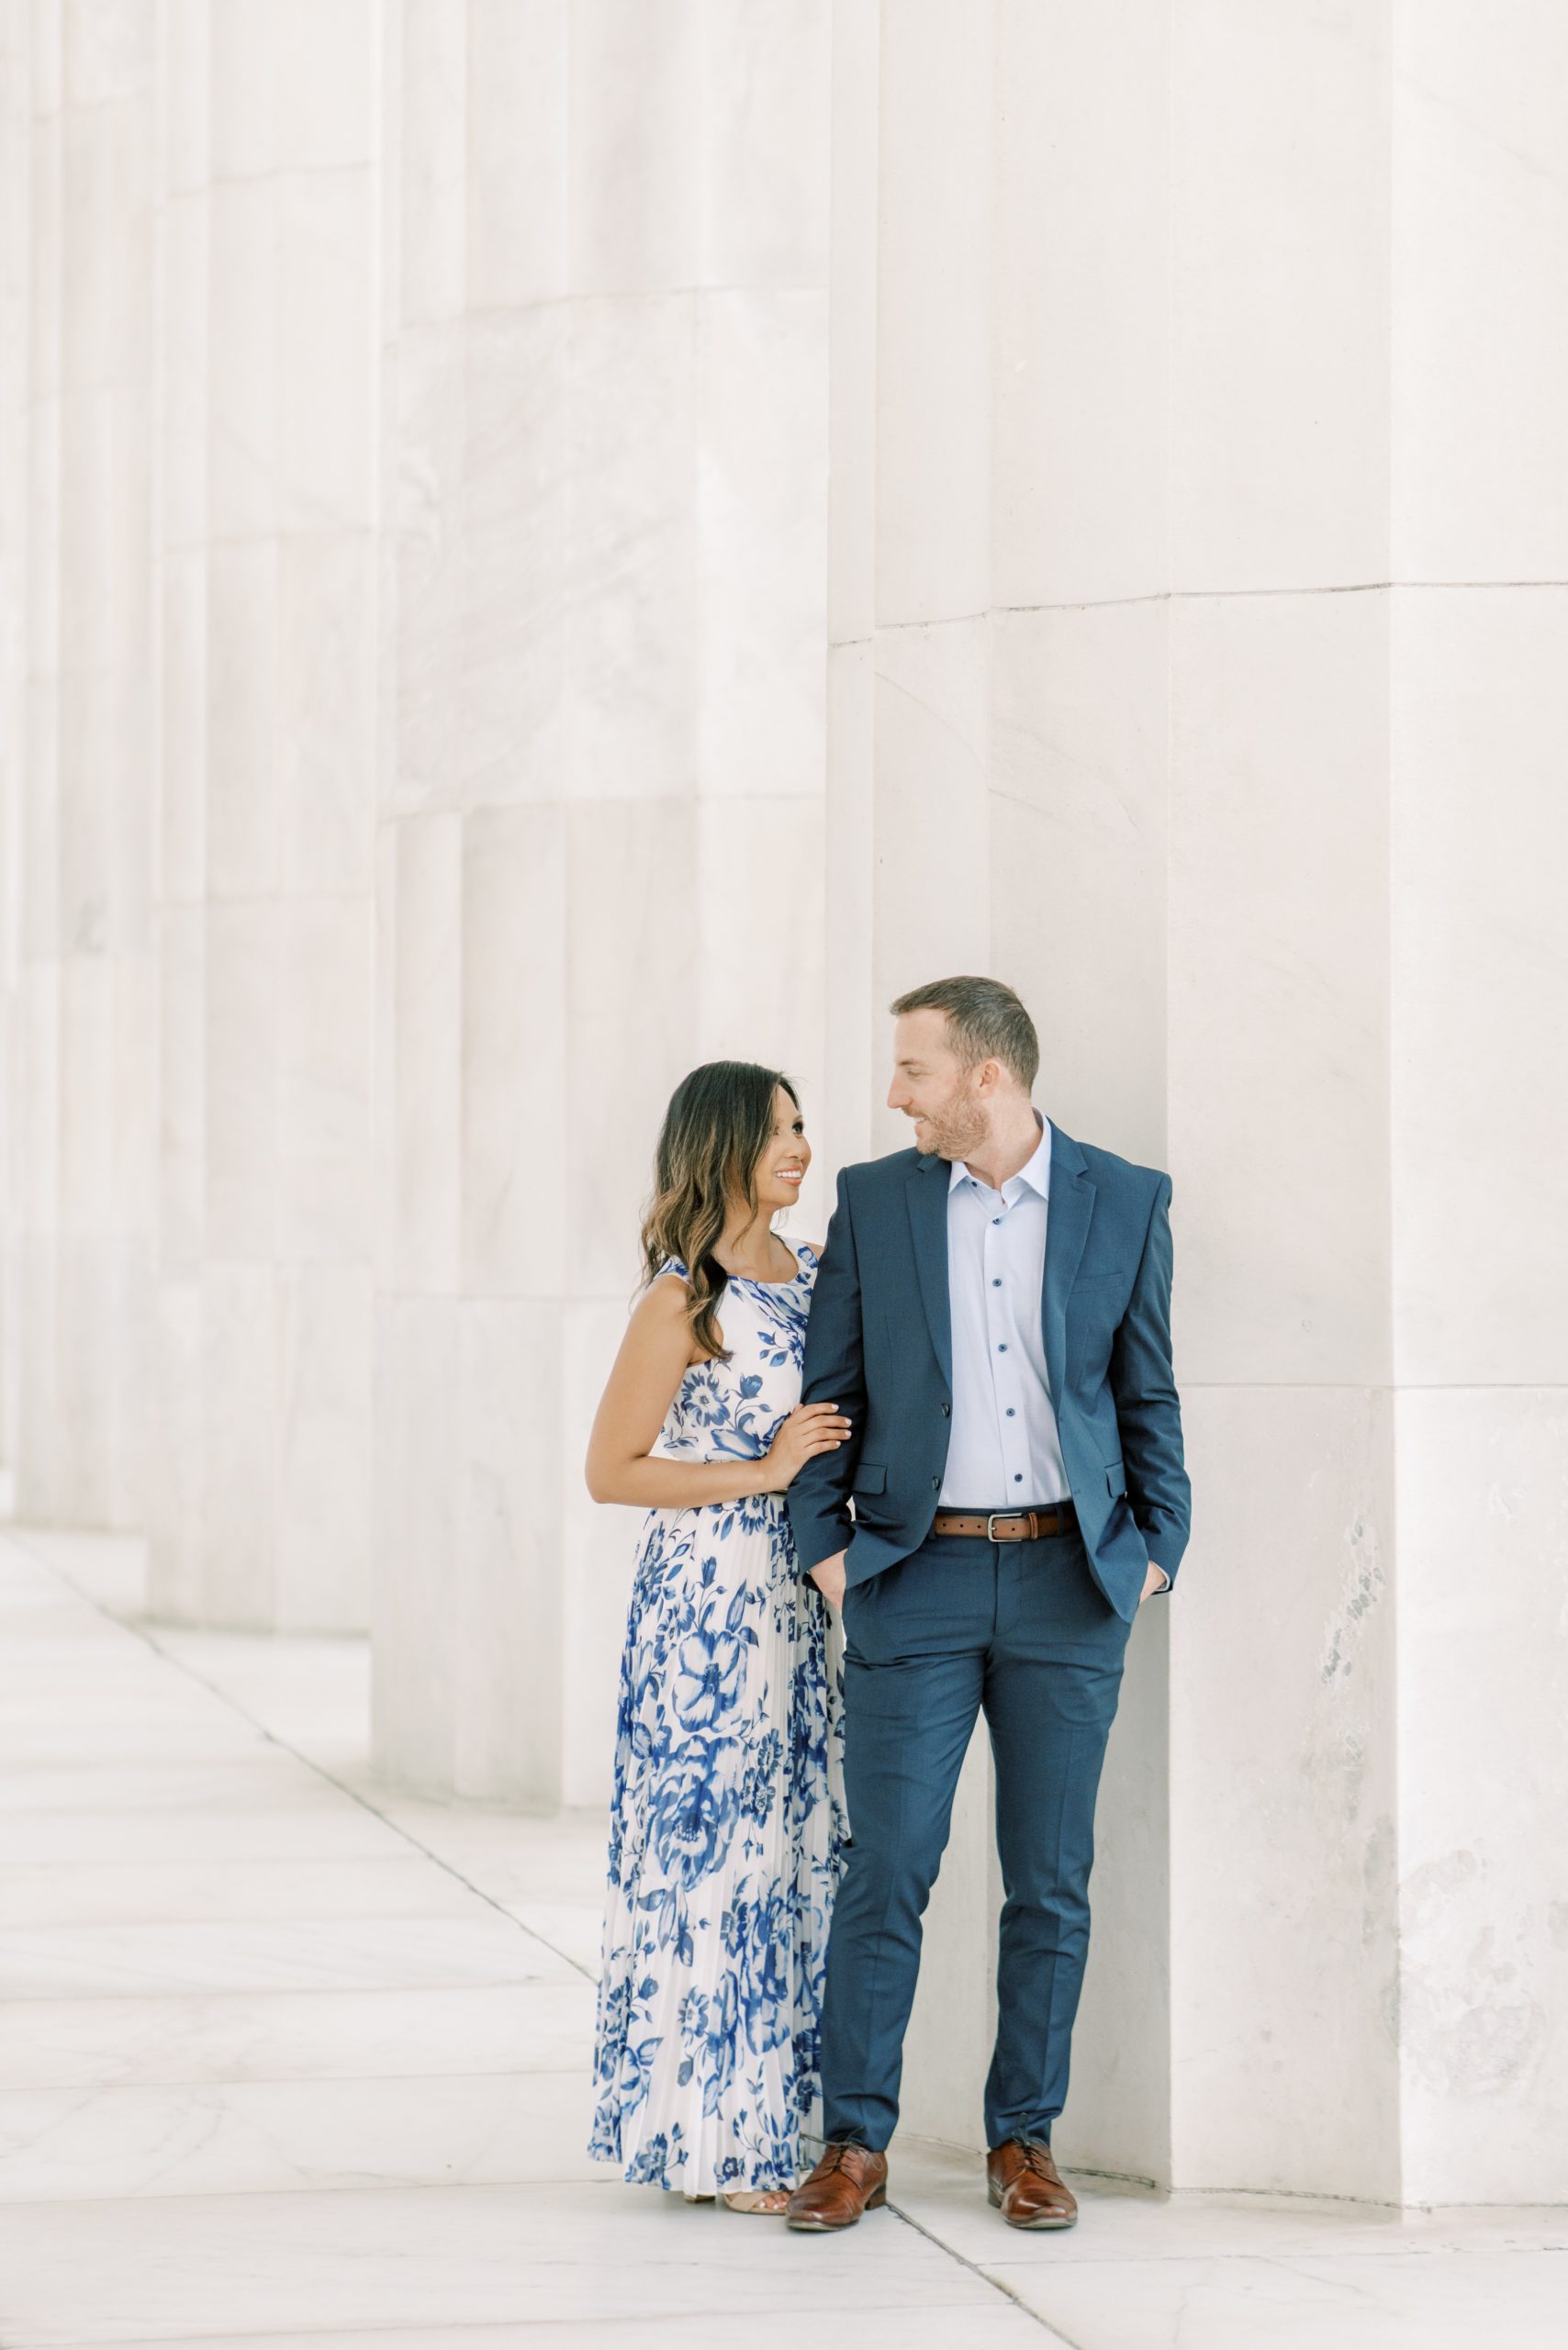 Engagement photos captured at the iconic monuments across Washington, DC by wedding photographer Alicia Lacey.